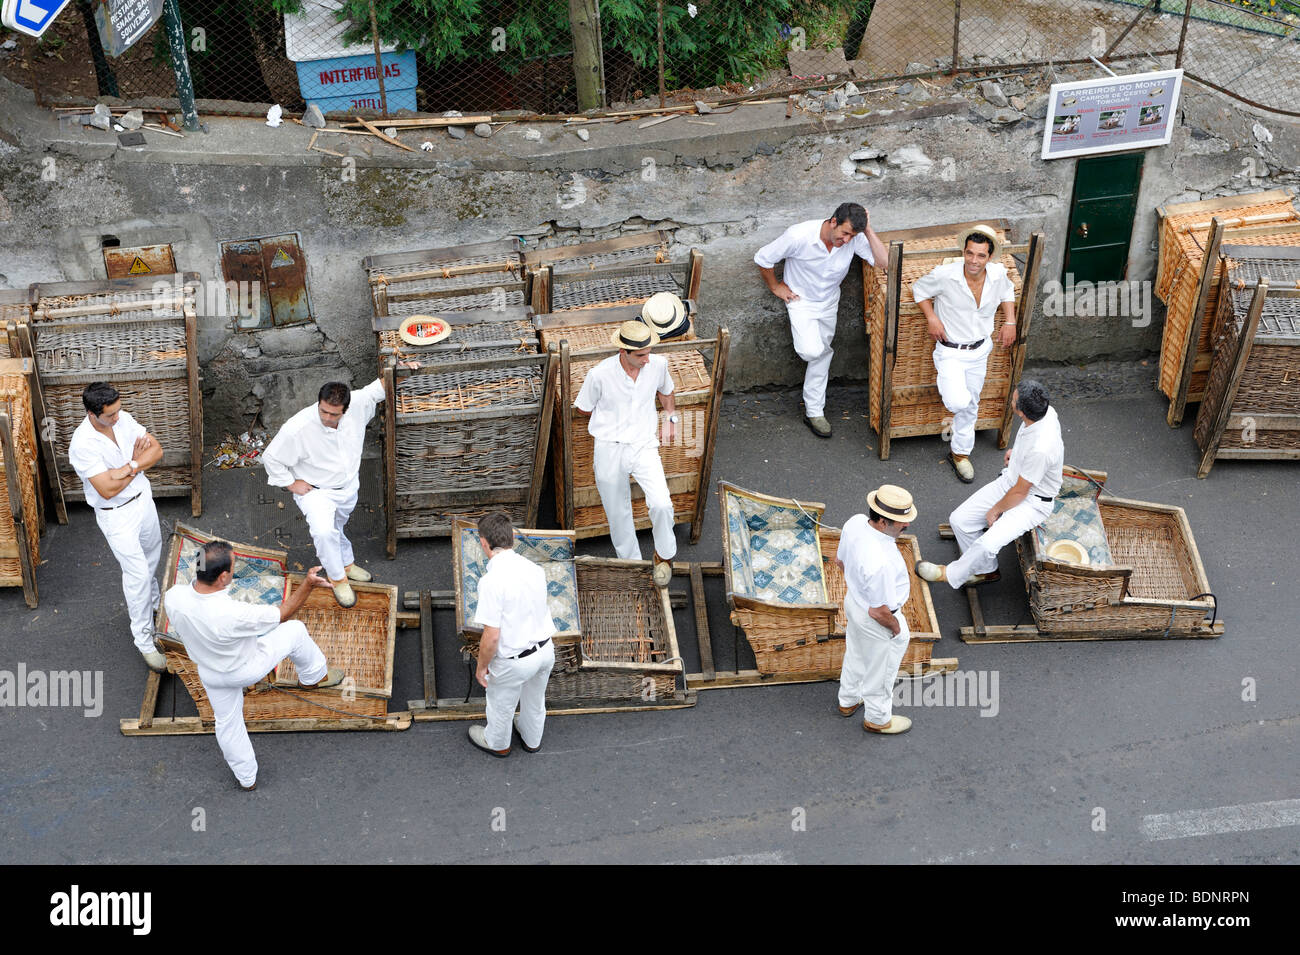 Basket sleighs, drivers waiting for customers in Monte district, in Funchal, Madeira, Portugal, Europe Stock Photo